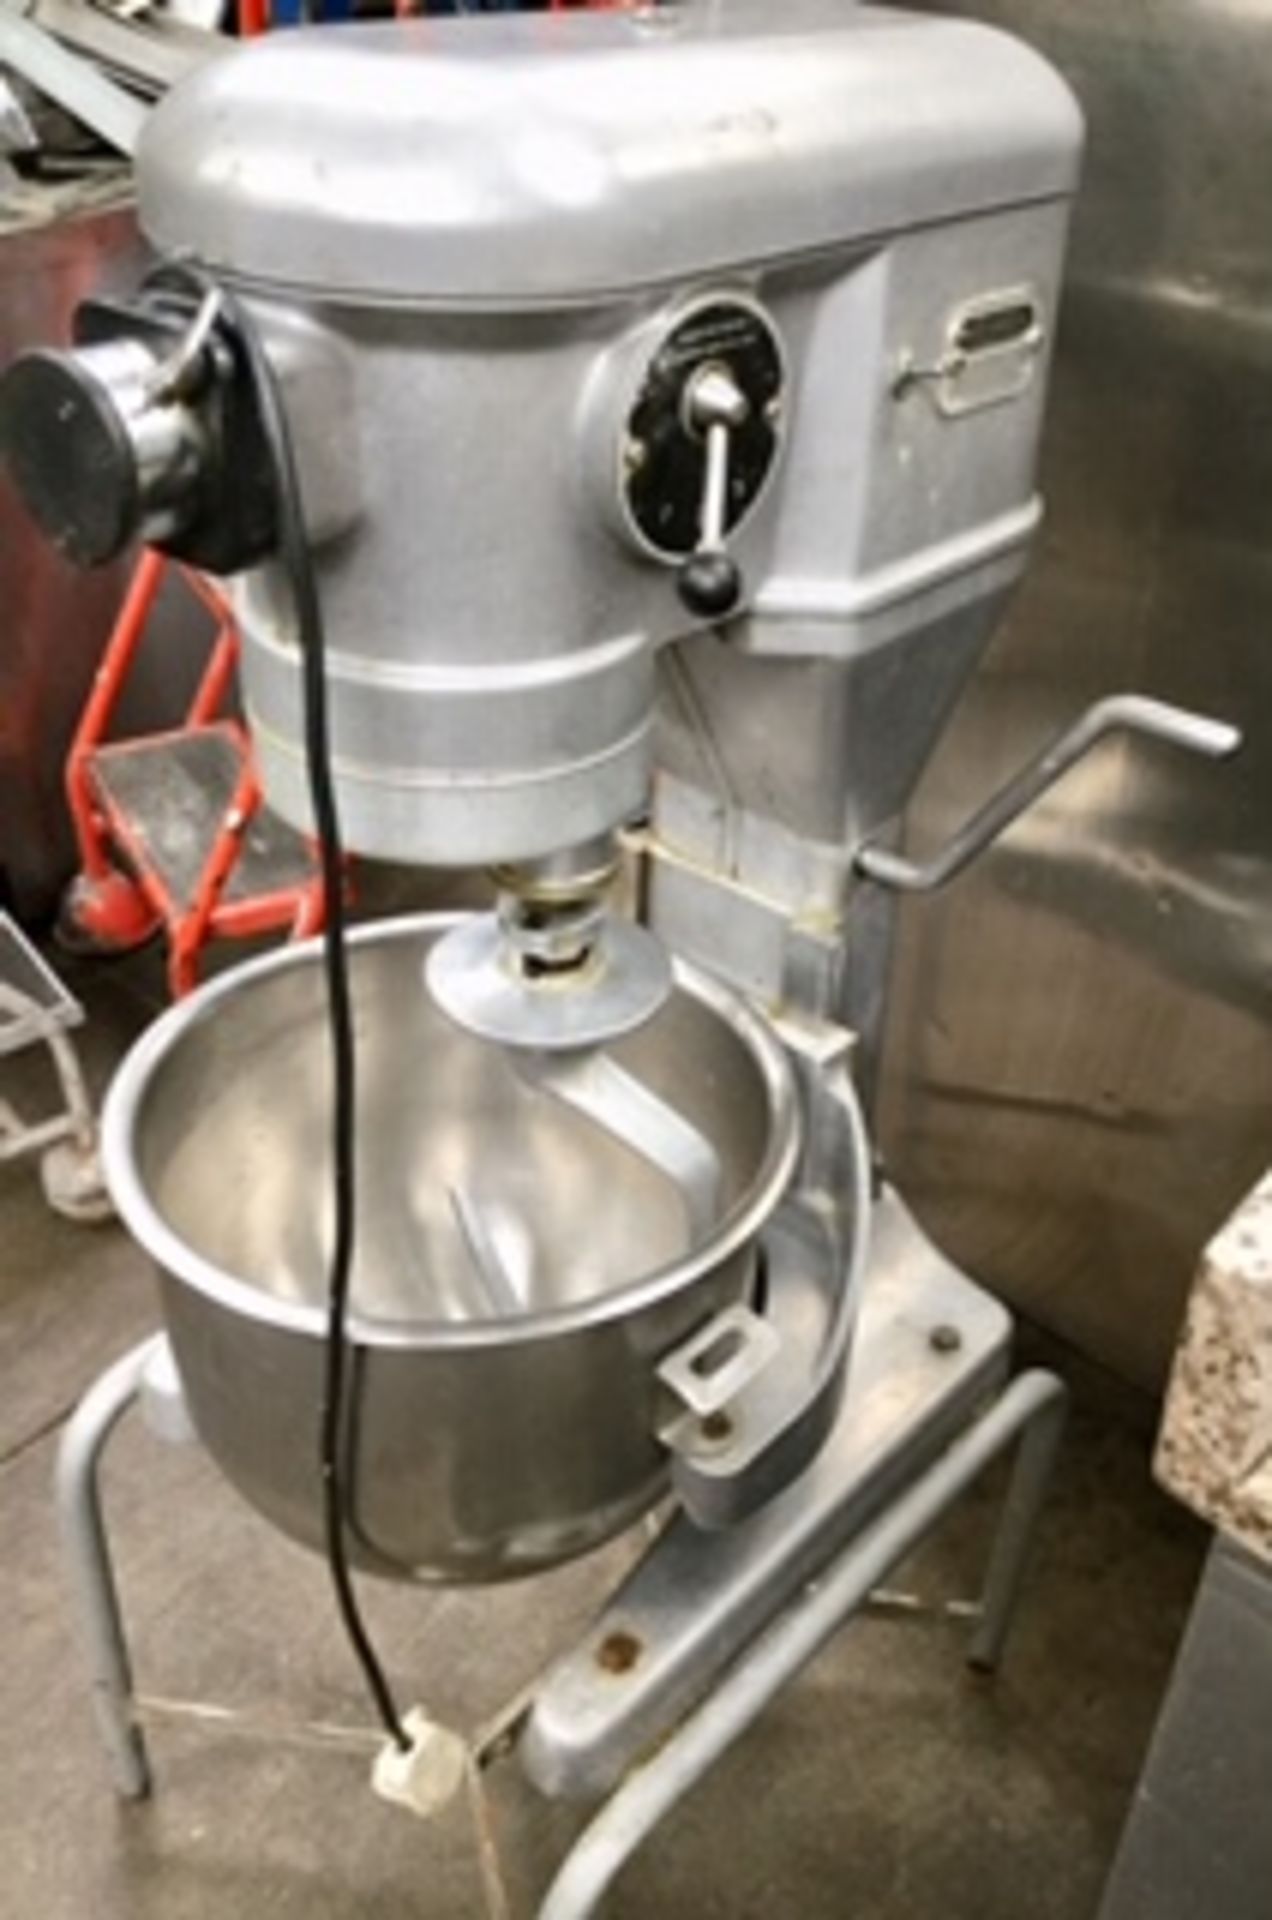 Crypto Peerless Three Speed Planetary Mixer – on Stand – Tested -NO VATwith Dough Hook, Beater &